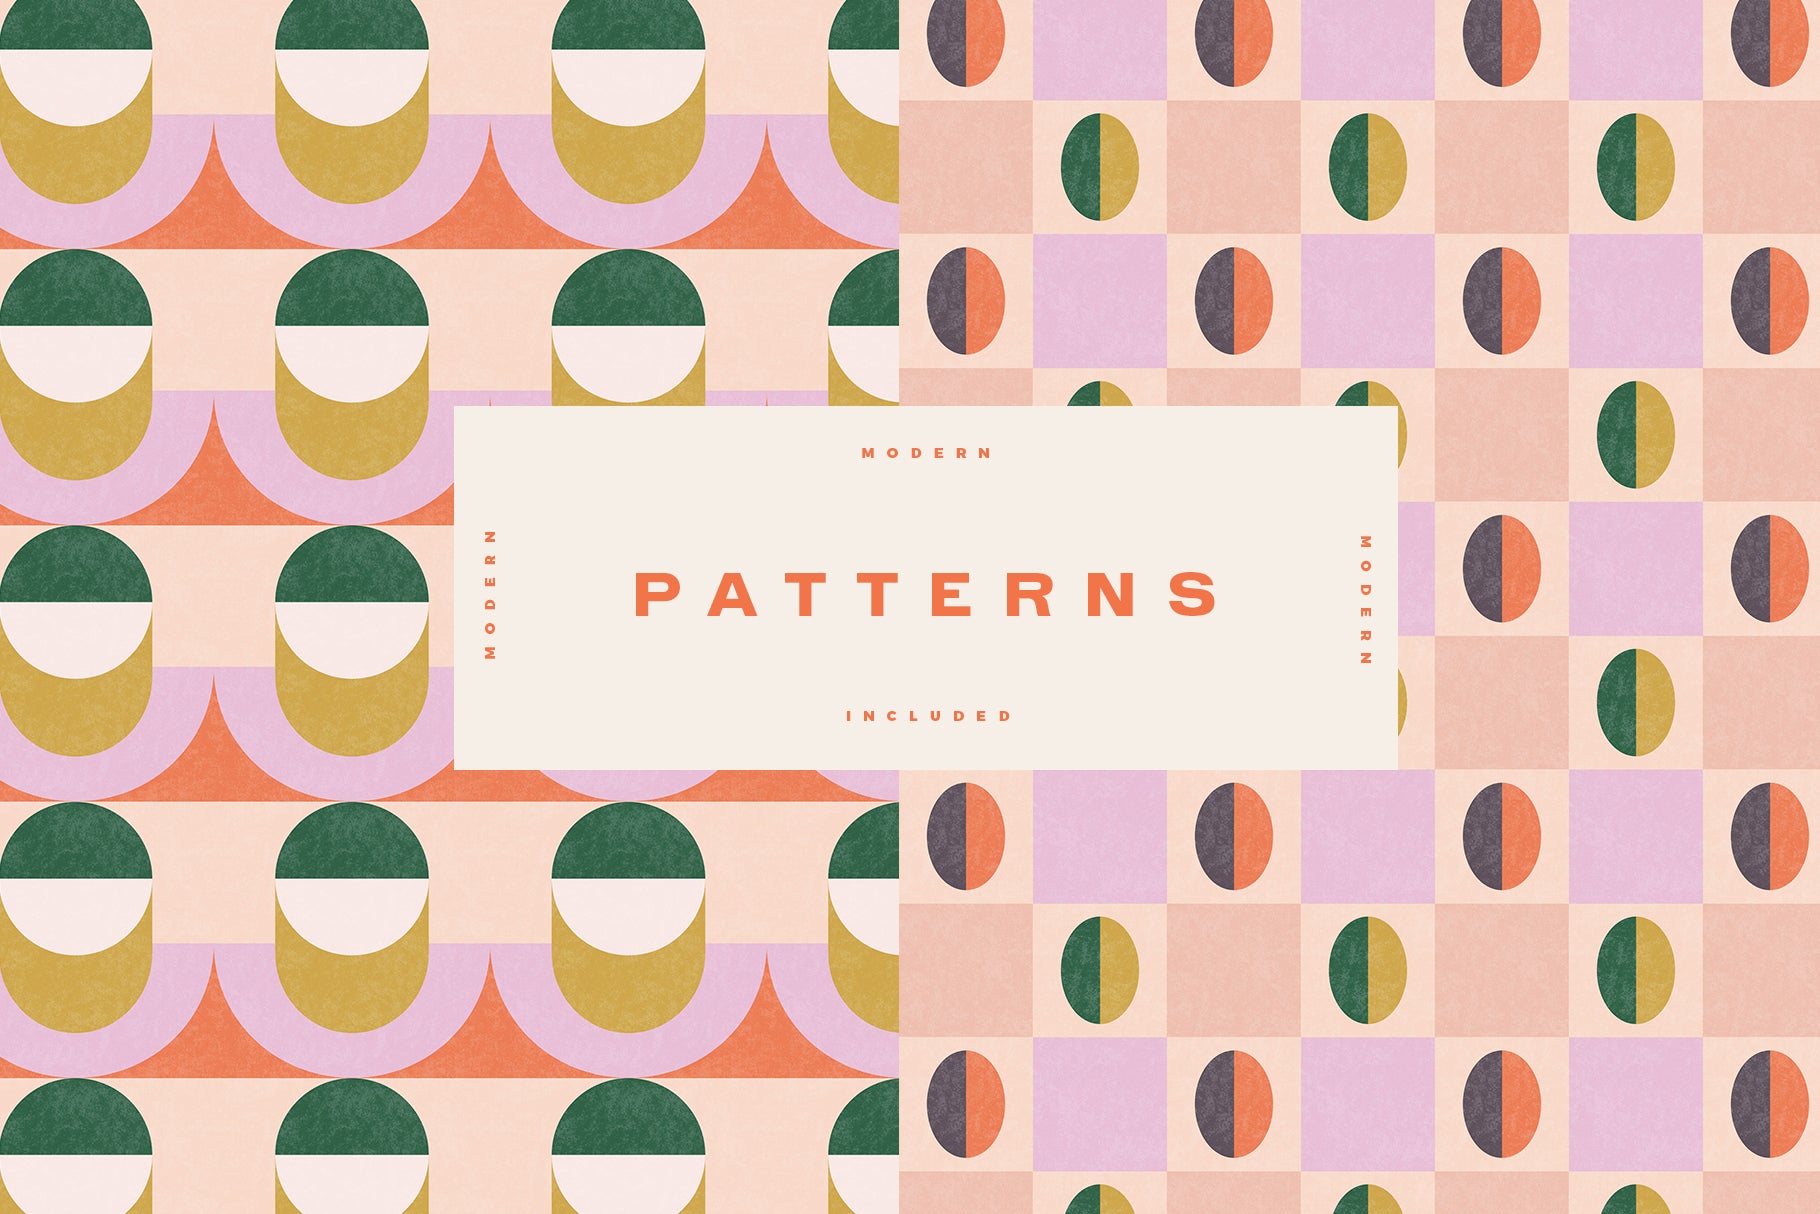 retro geometric patterns in pink green and orange with text in the center